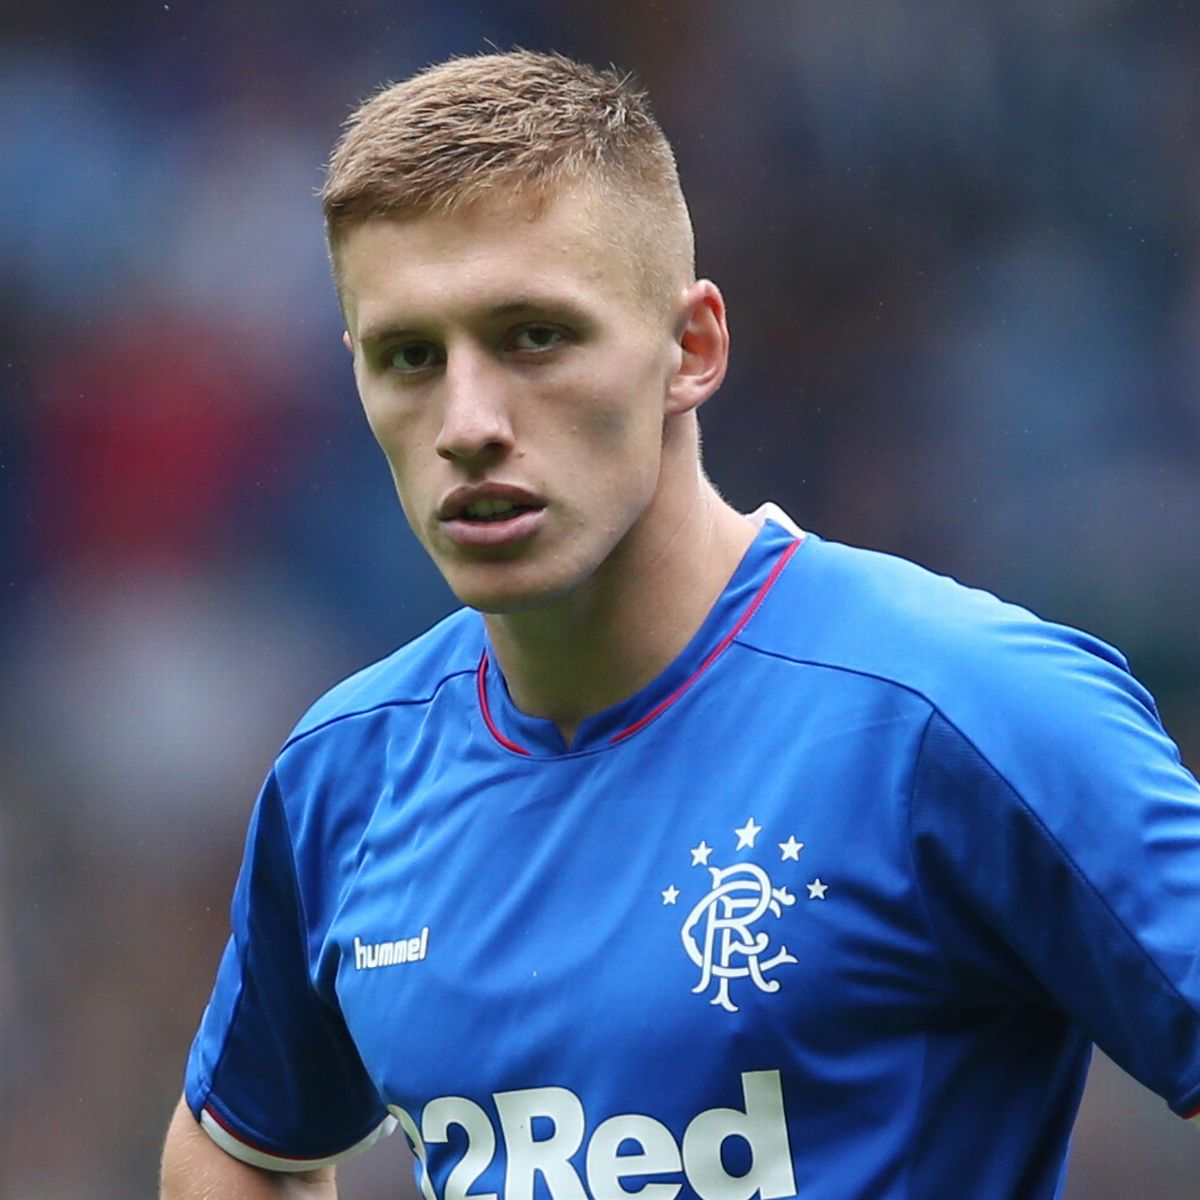 Rangers midfielder set to get his move from Ibrox